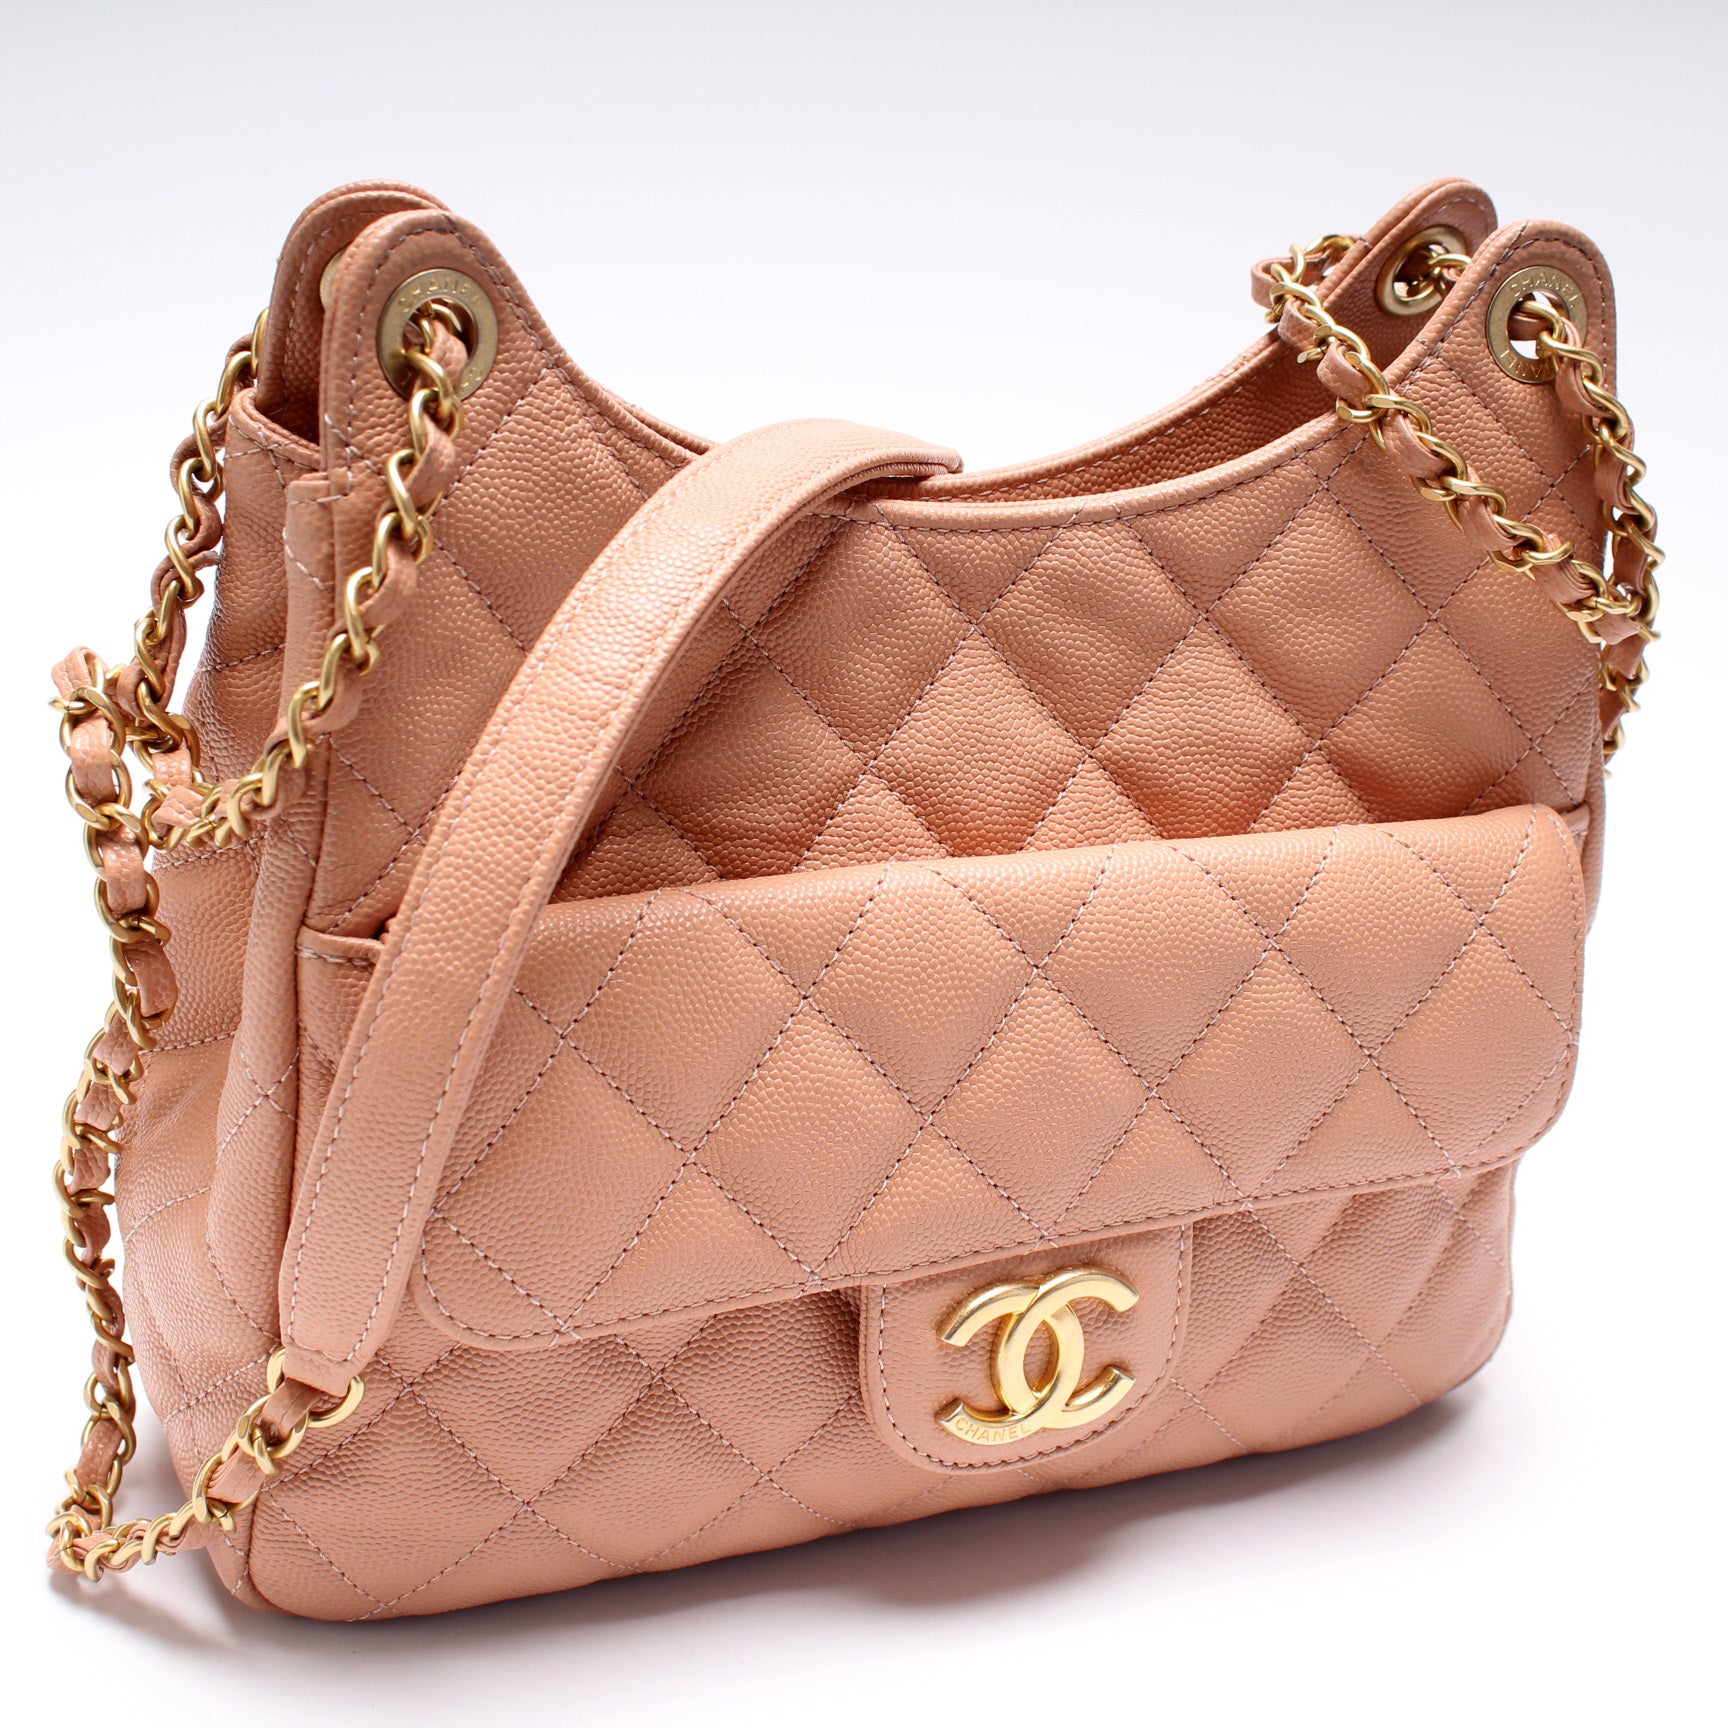 Chanel Pre-owned Small Wavy CC Hobo Bag